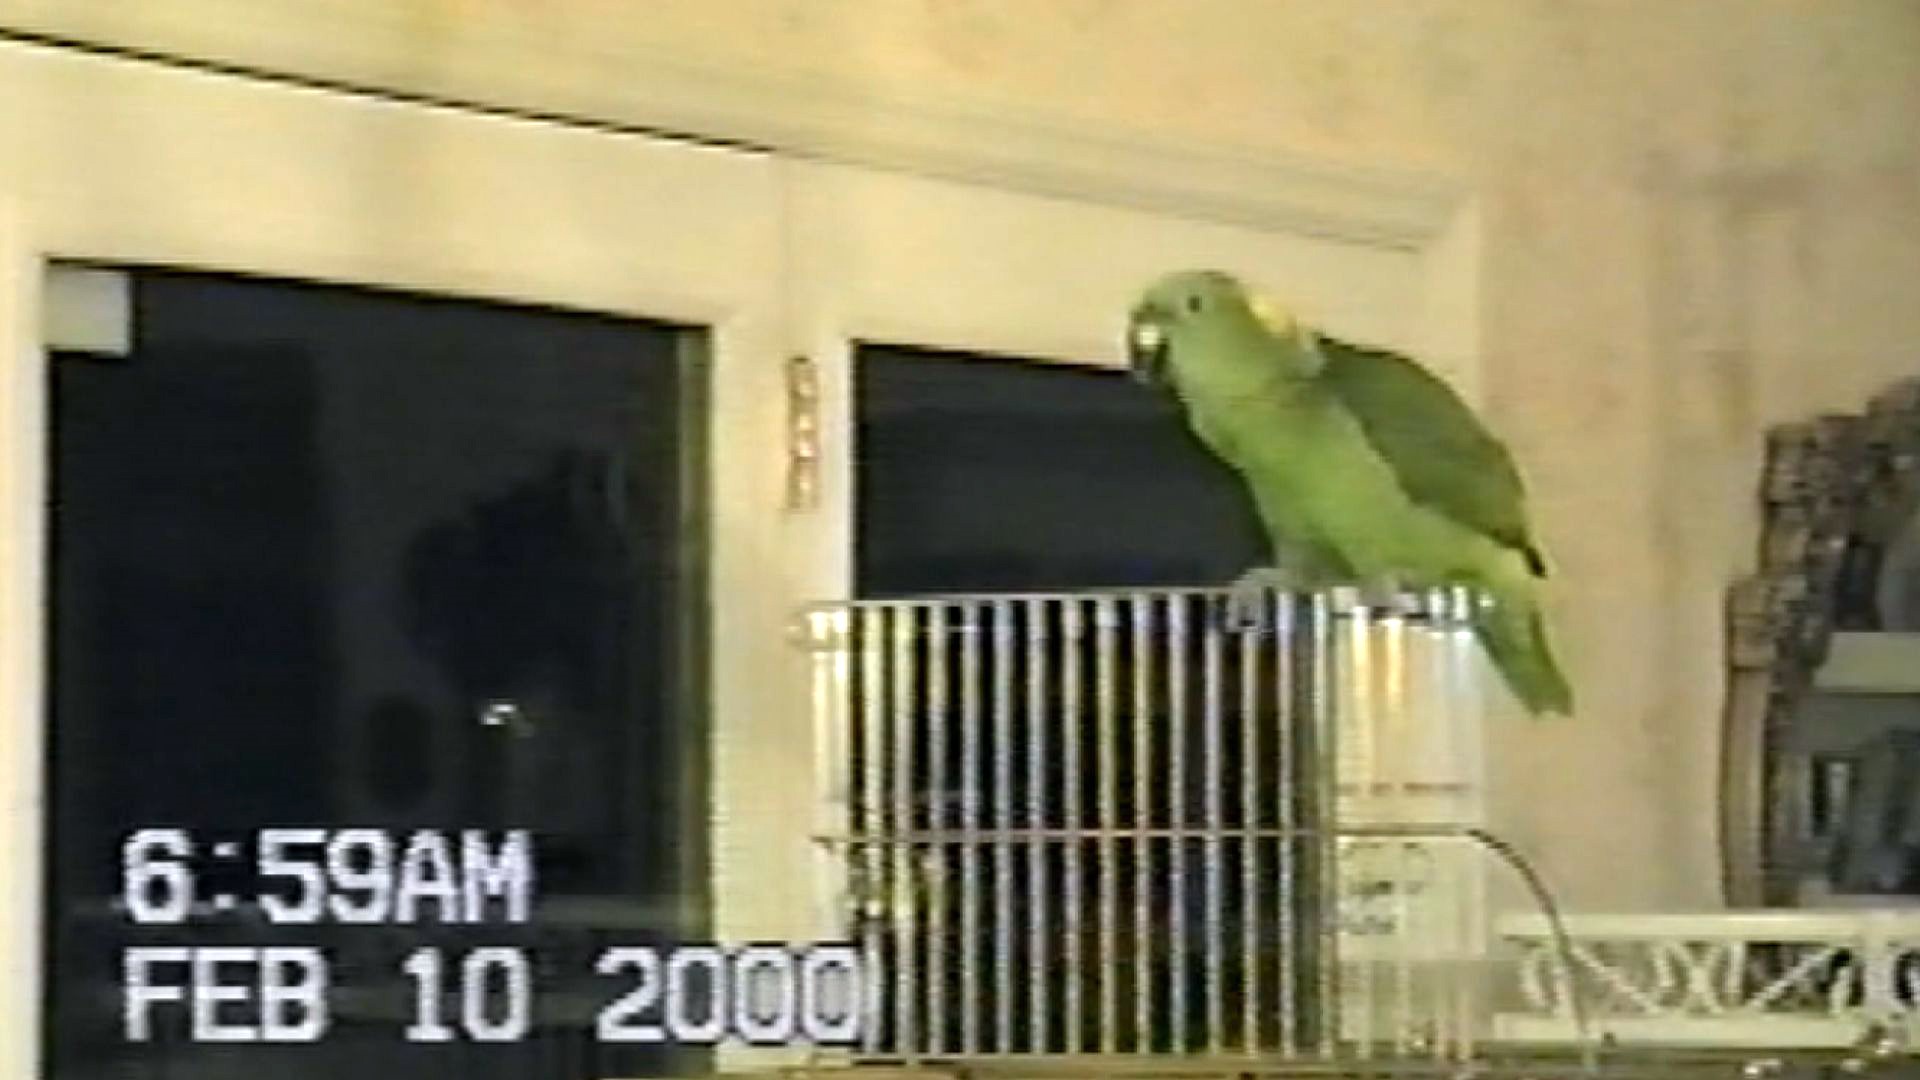 The Tennessee Archive of Moving Image and Sound found an abandoned unlabeled tape of a parrot singing the famous Tennessee tune.